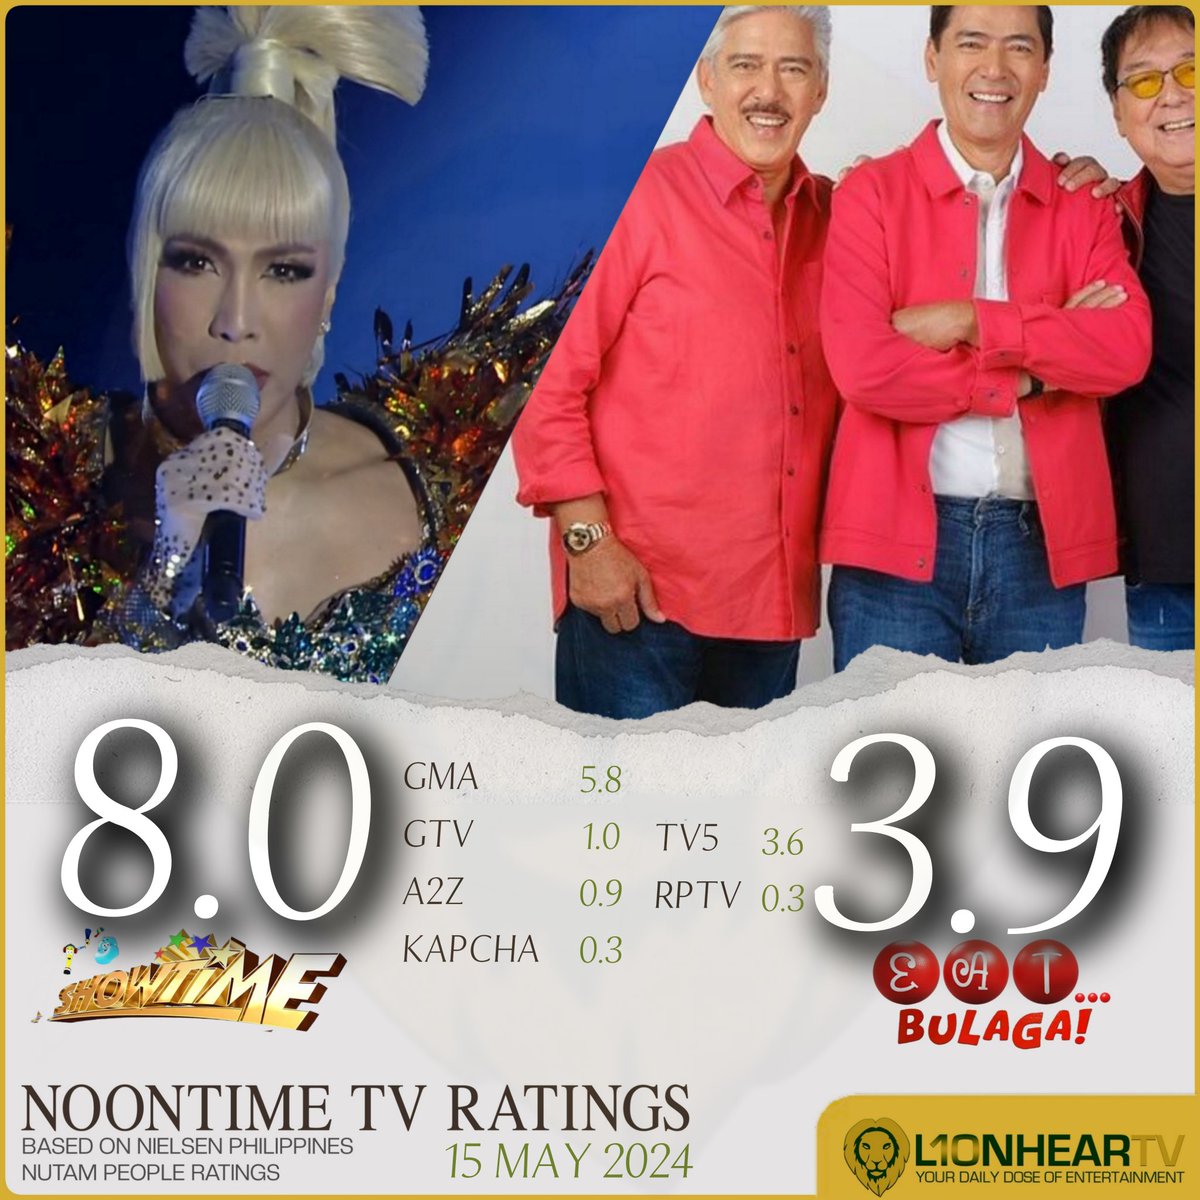 LOOK: #ItsShowtime continues to tower above  #EATBulaga in the ratings game, keeping its lead more than twofolds, Nielsen Philippines data for May 15, show.

MORE RATINGS: lionheartv.net/ratings